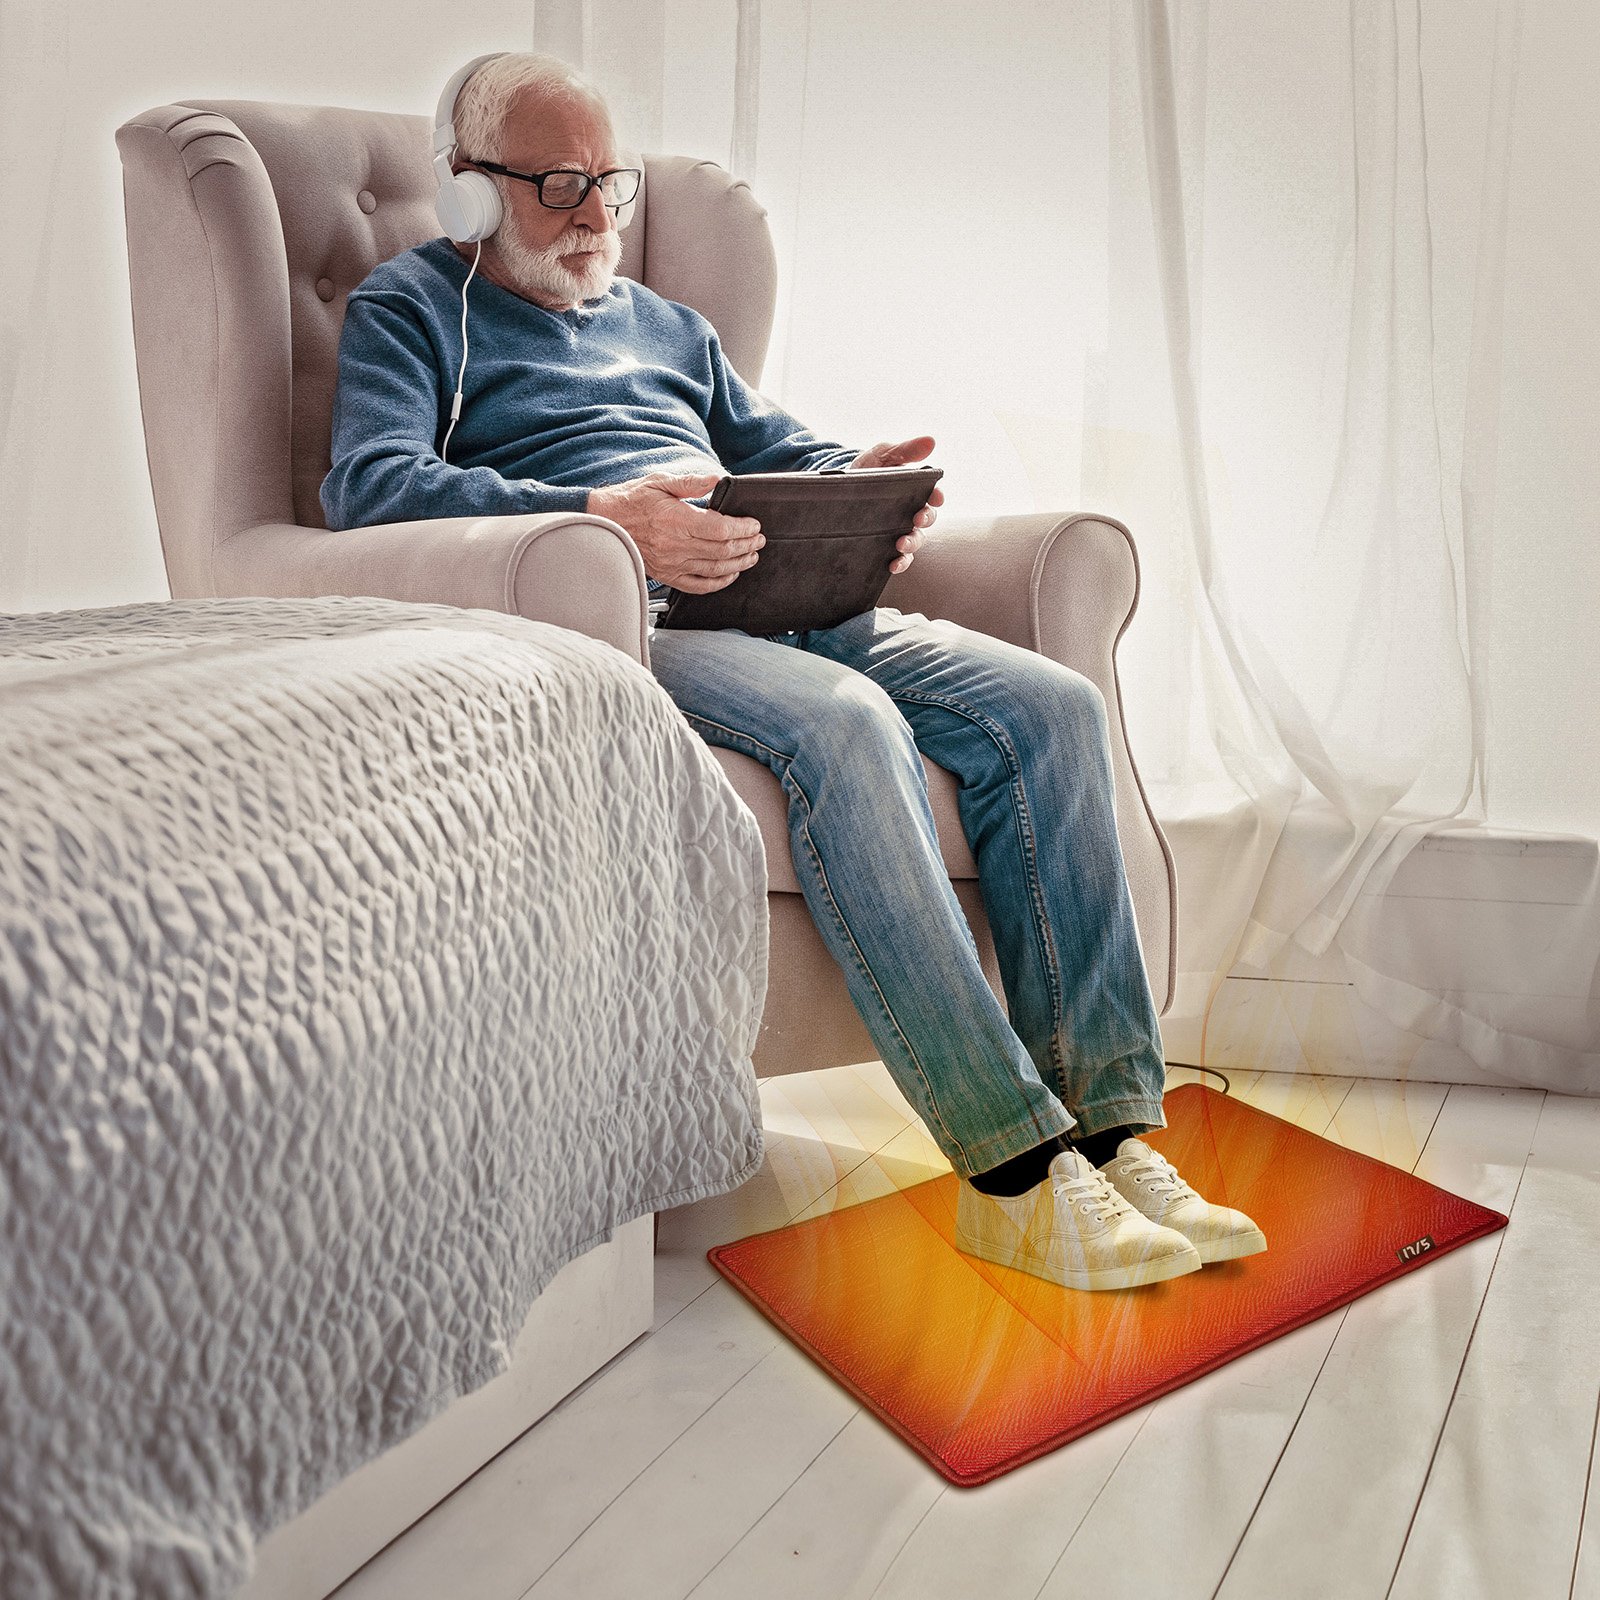 Heated carpets are ideal for older people who suffer from cold feet